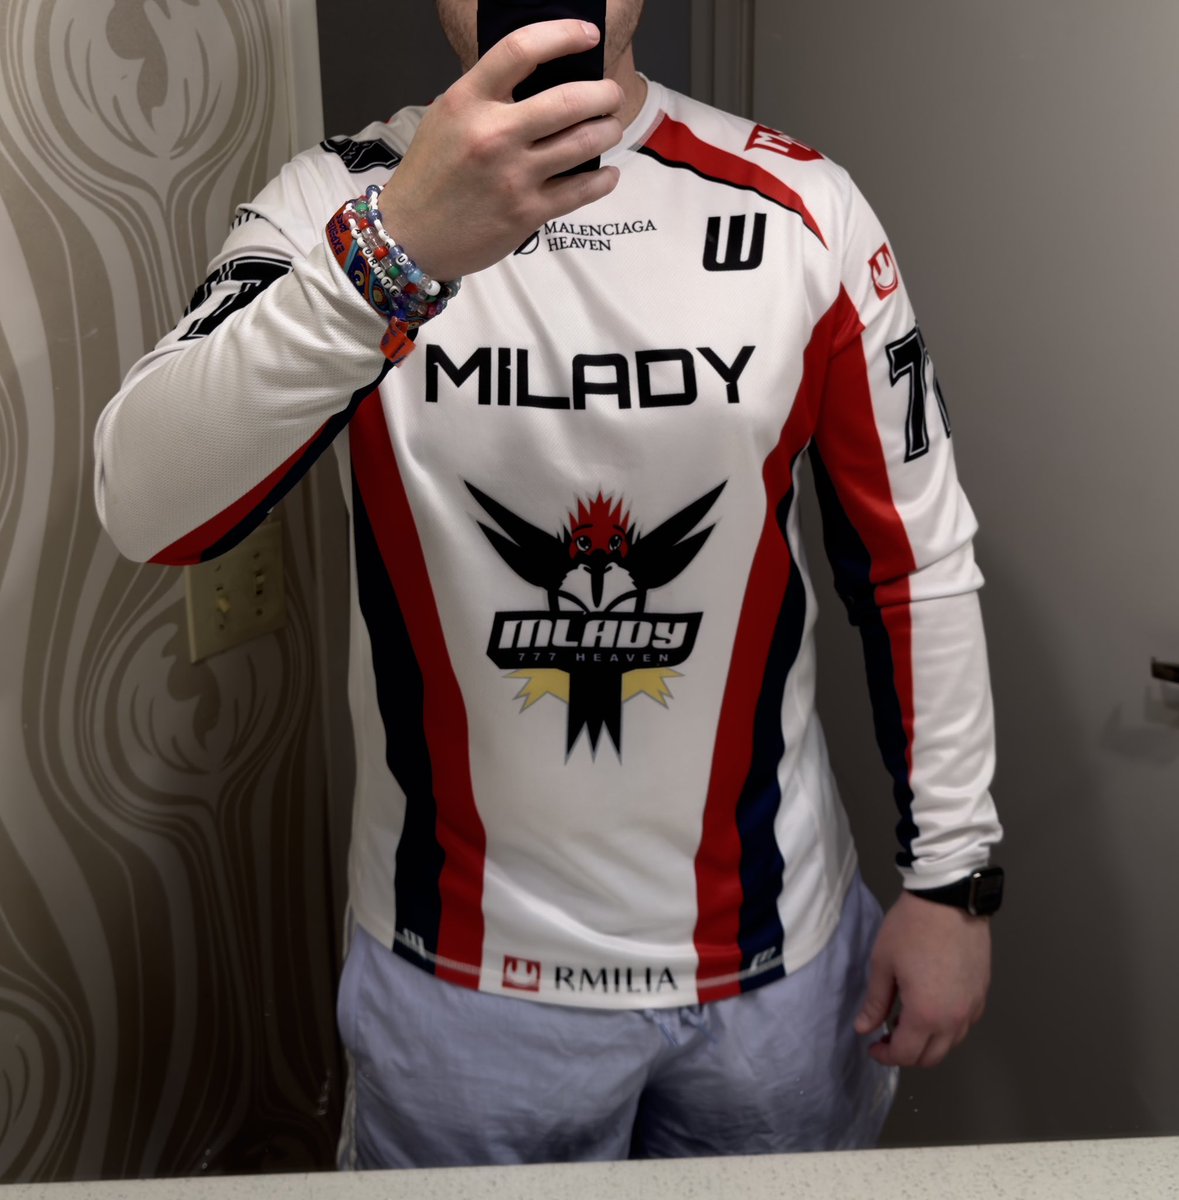 milady jersey for the final day of EDC